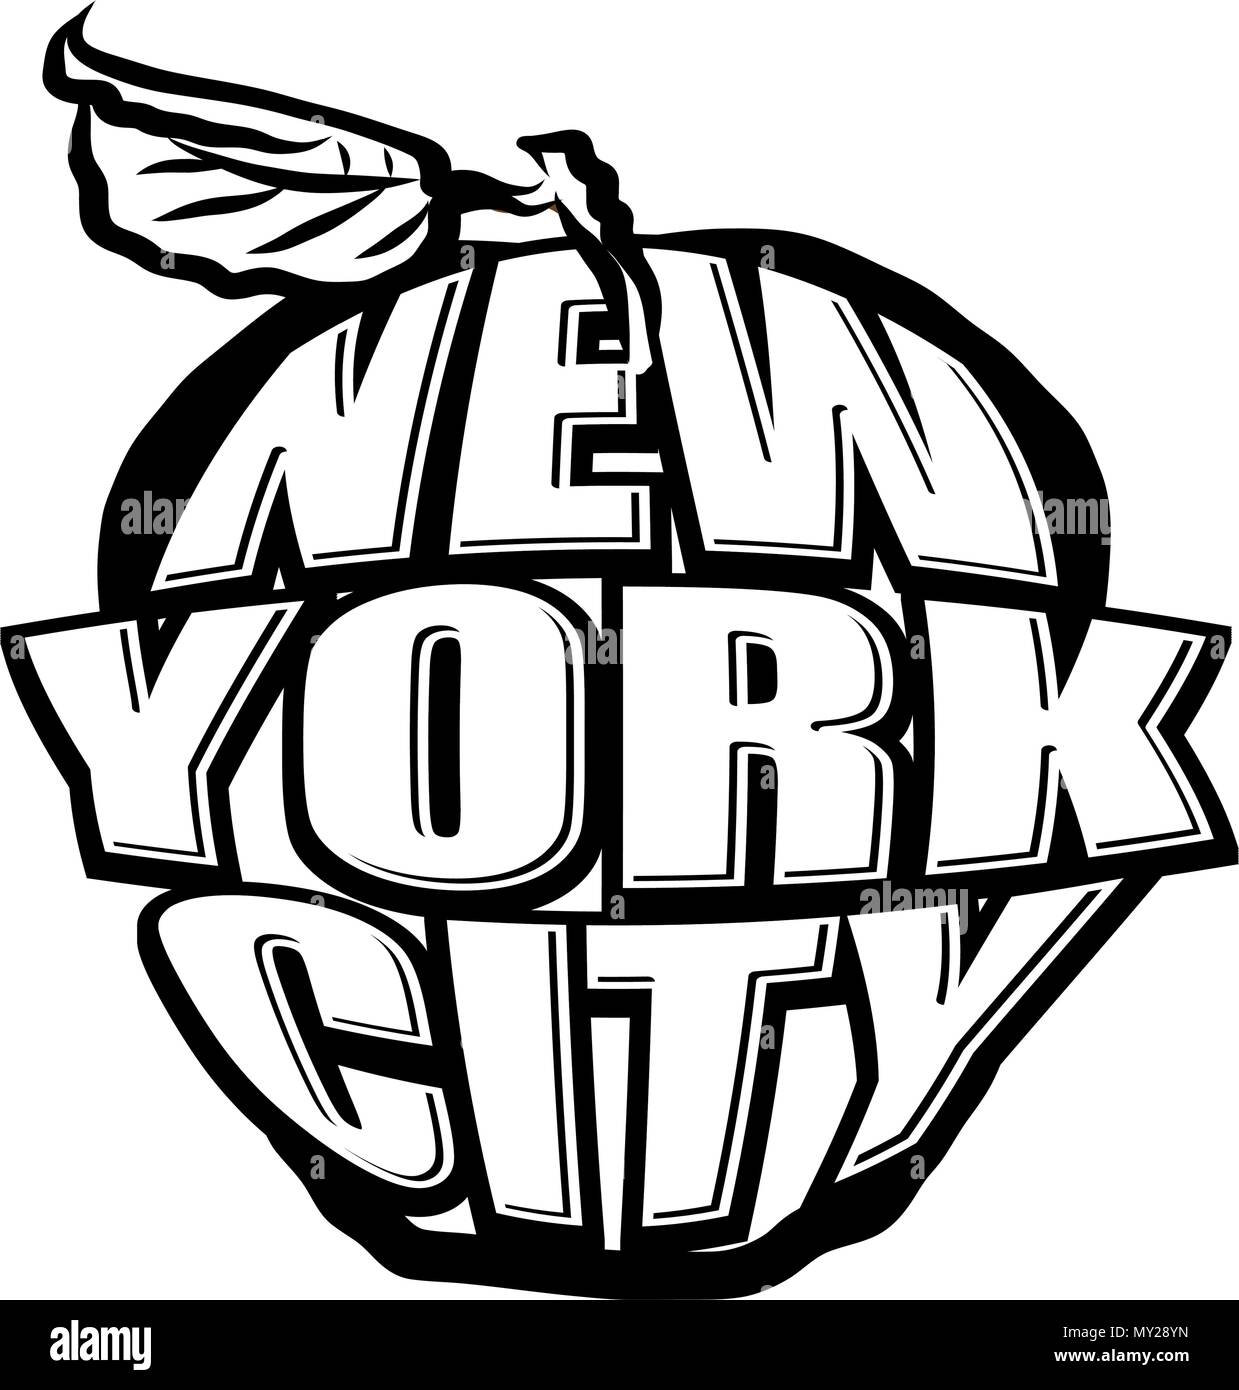 Big Apple NYC Logo. Black and White version. Lettering vector artwork. Stock Vector